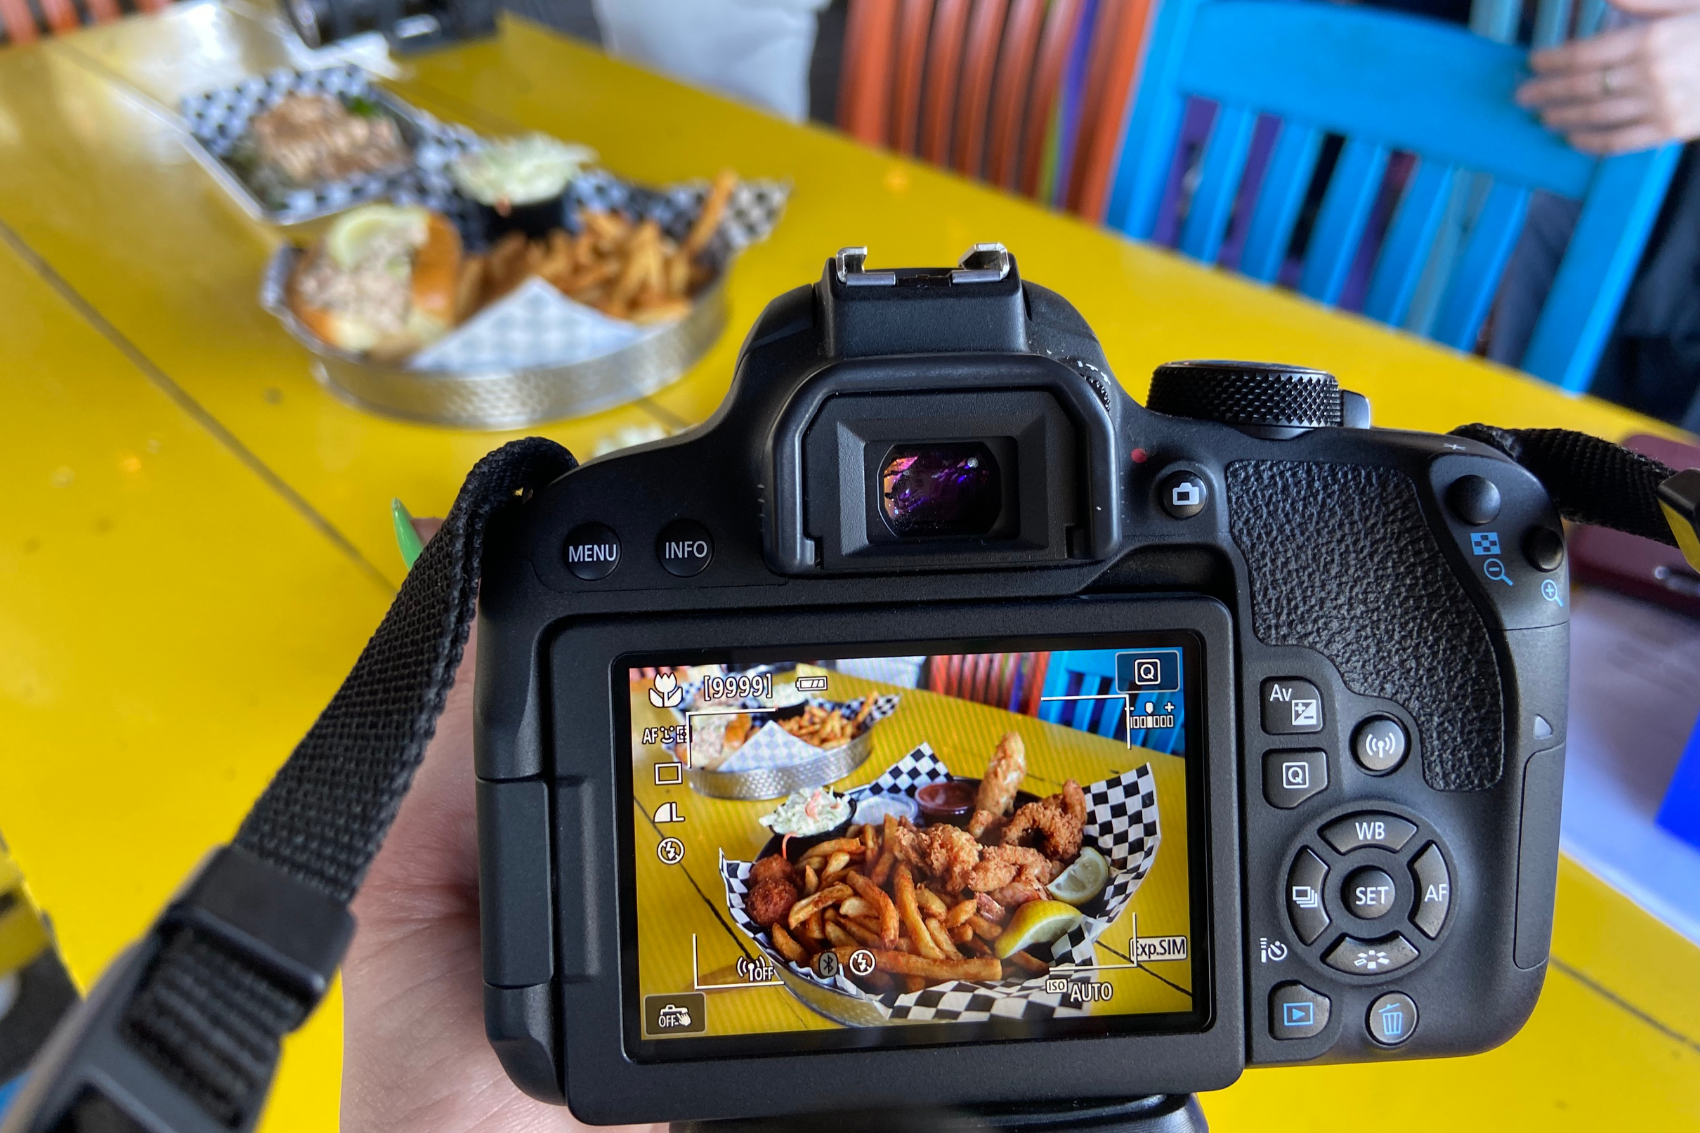 A camera taking a picture of fish and chips on a yellow table.